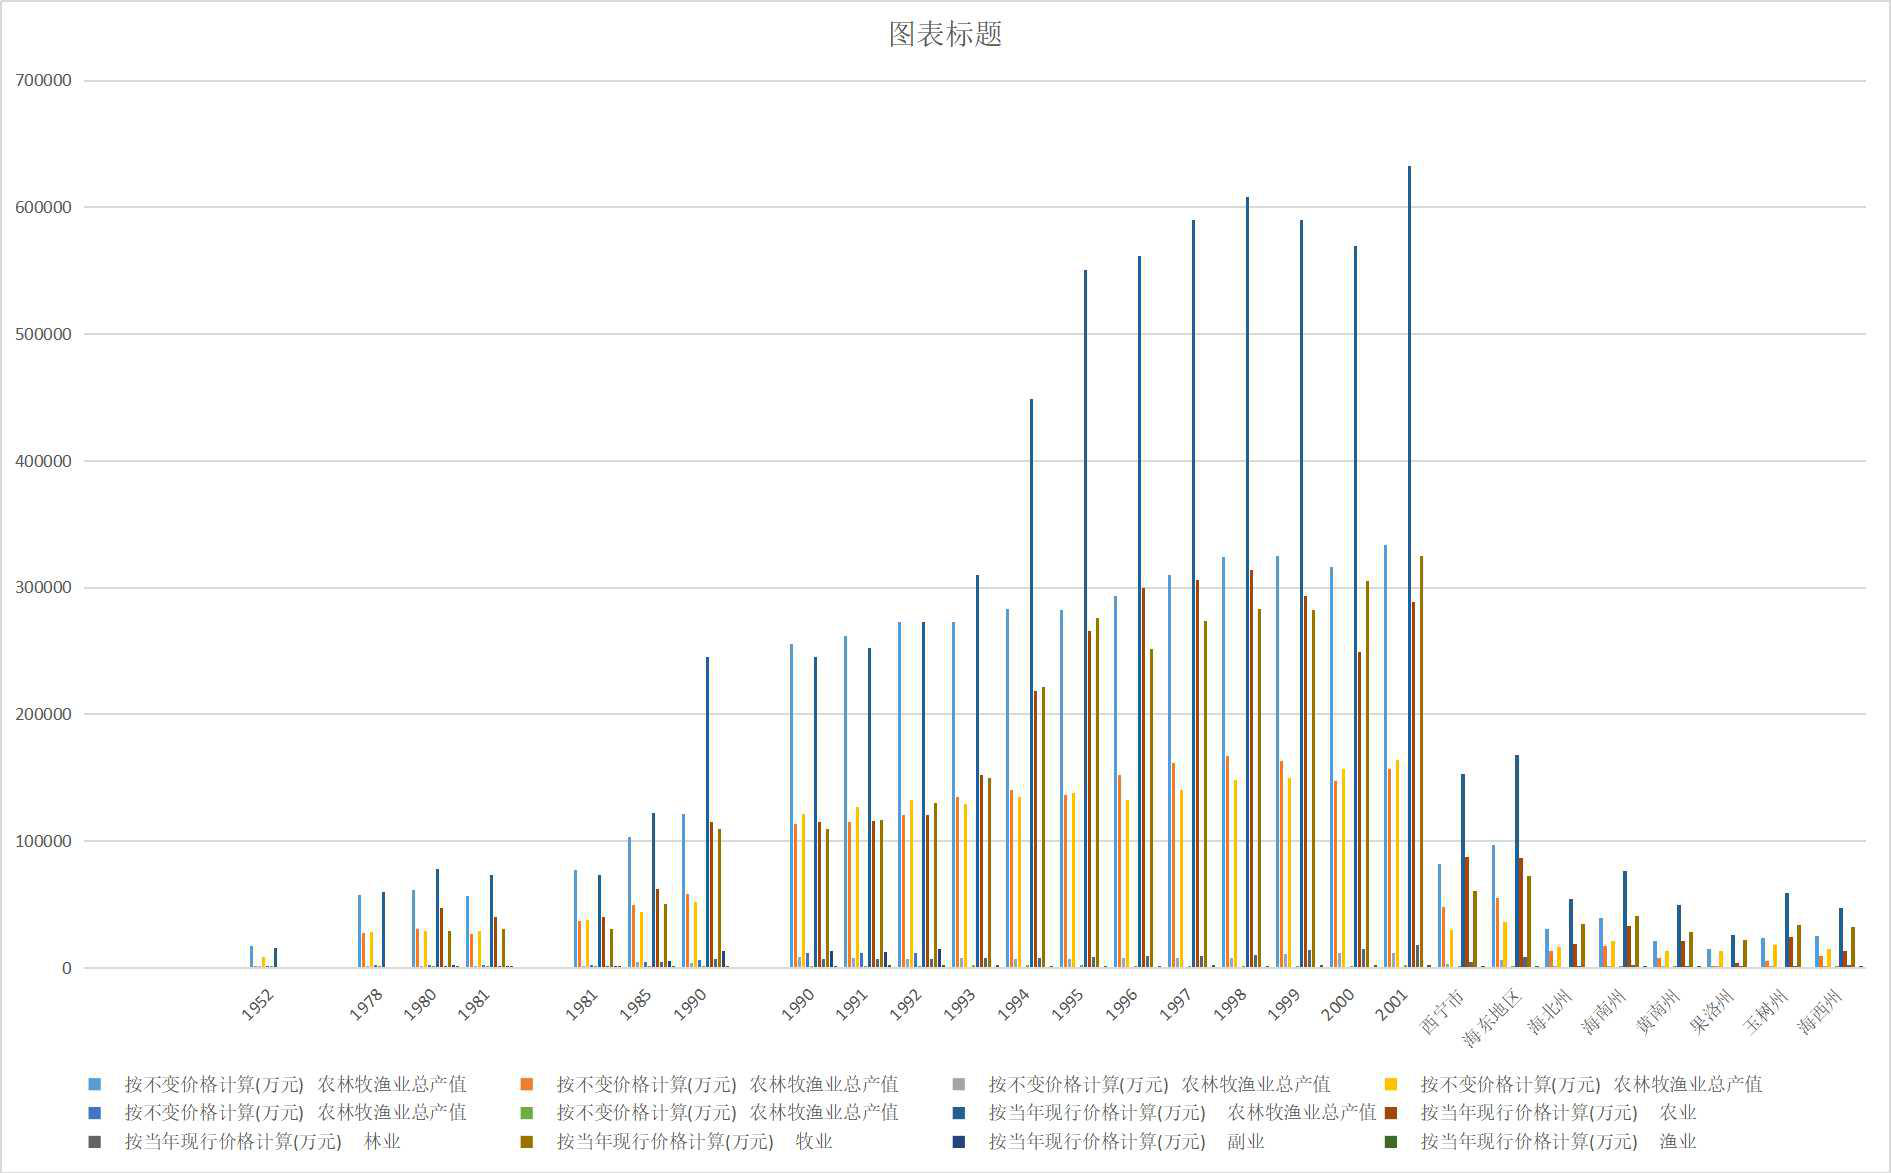 Gross output value of agriculture, forestry, animal husbandry and fishery in Qinghai Province (1952-2018)